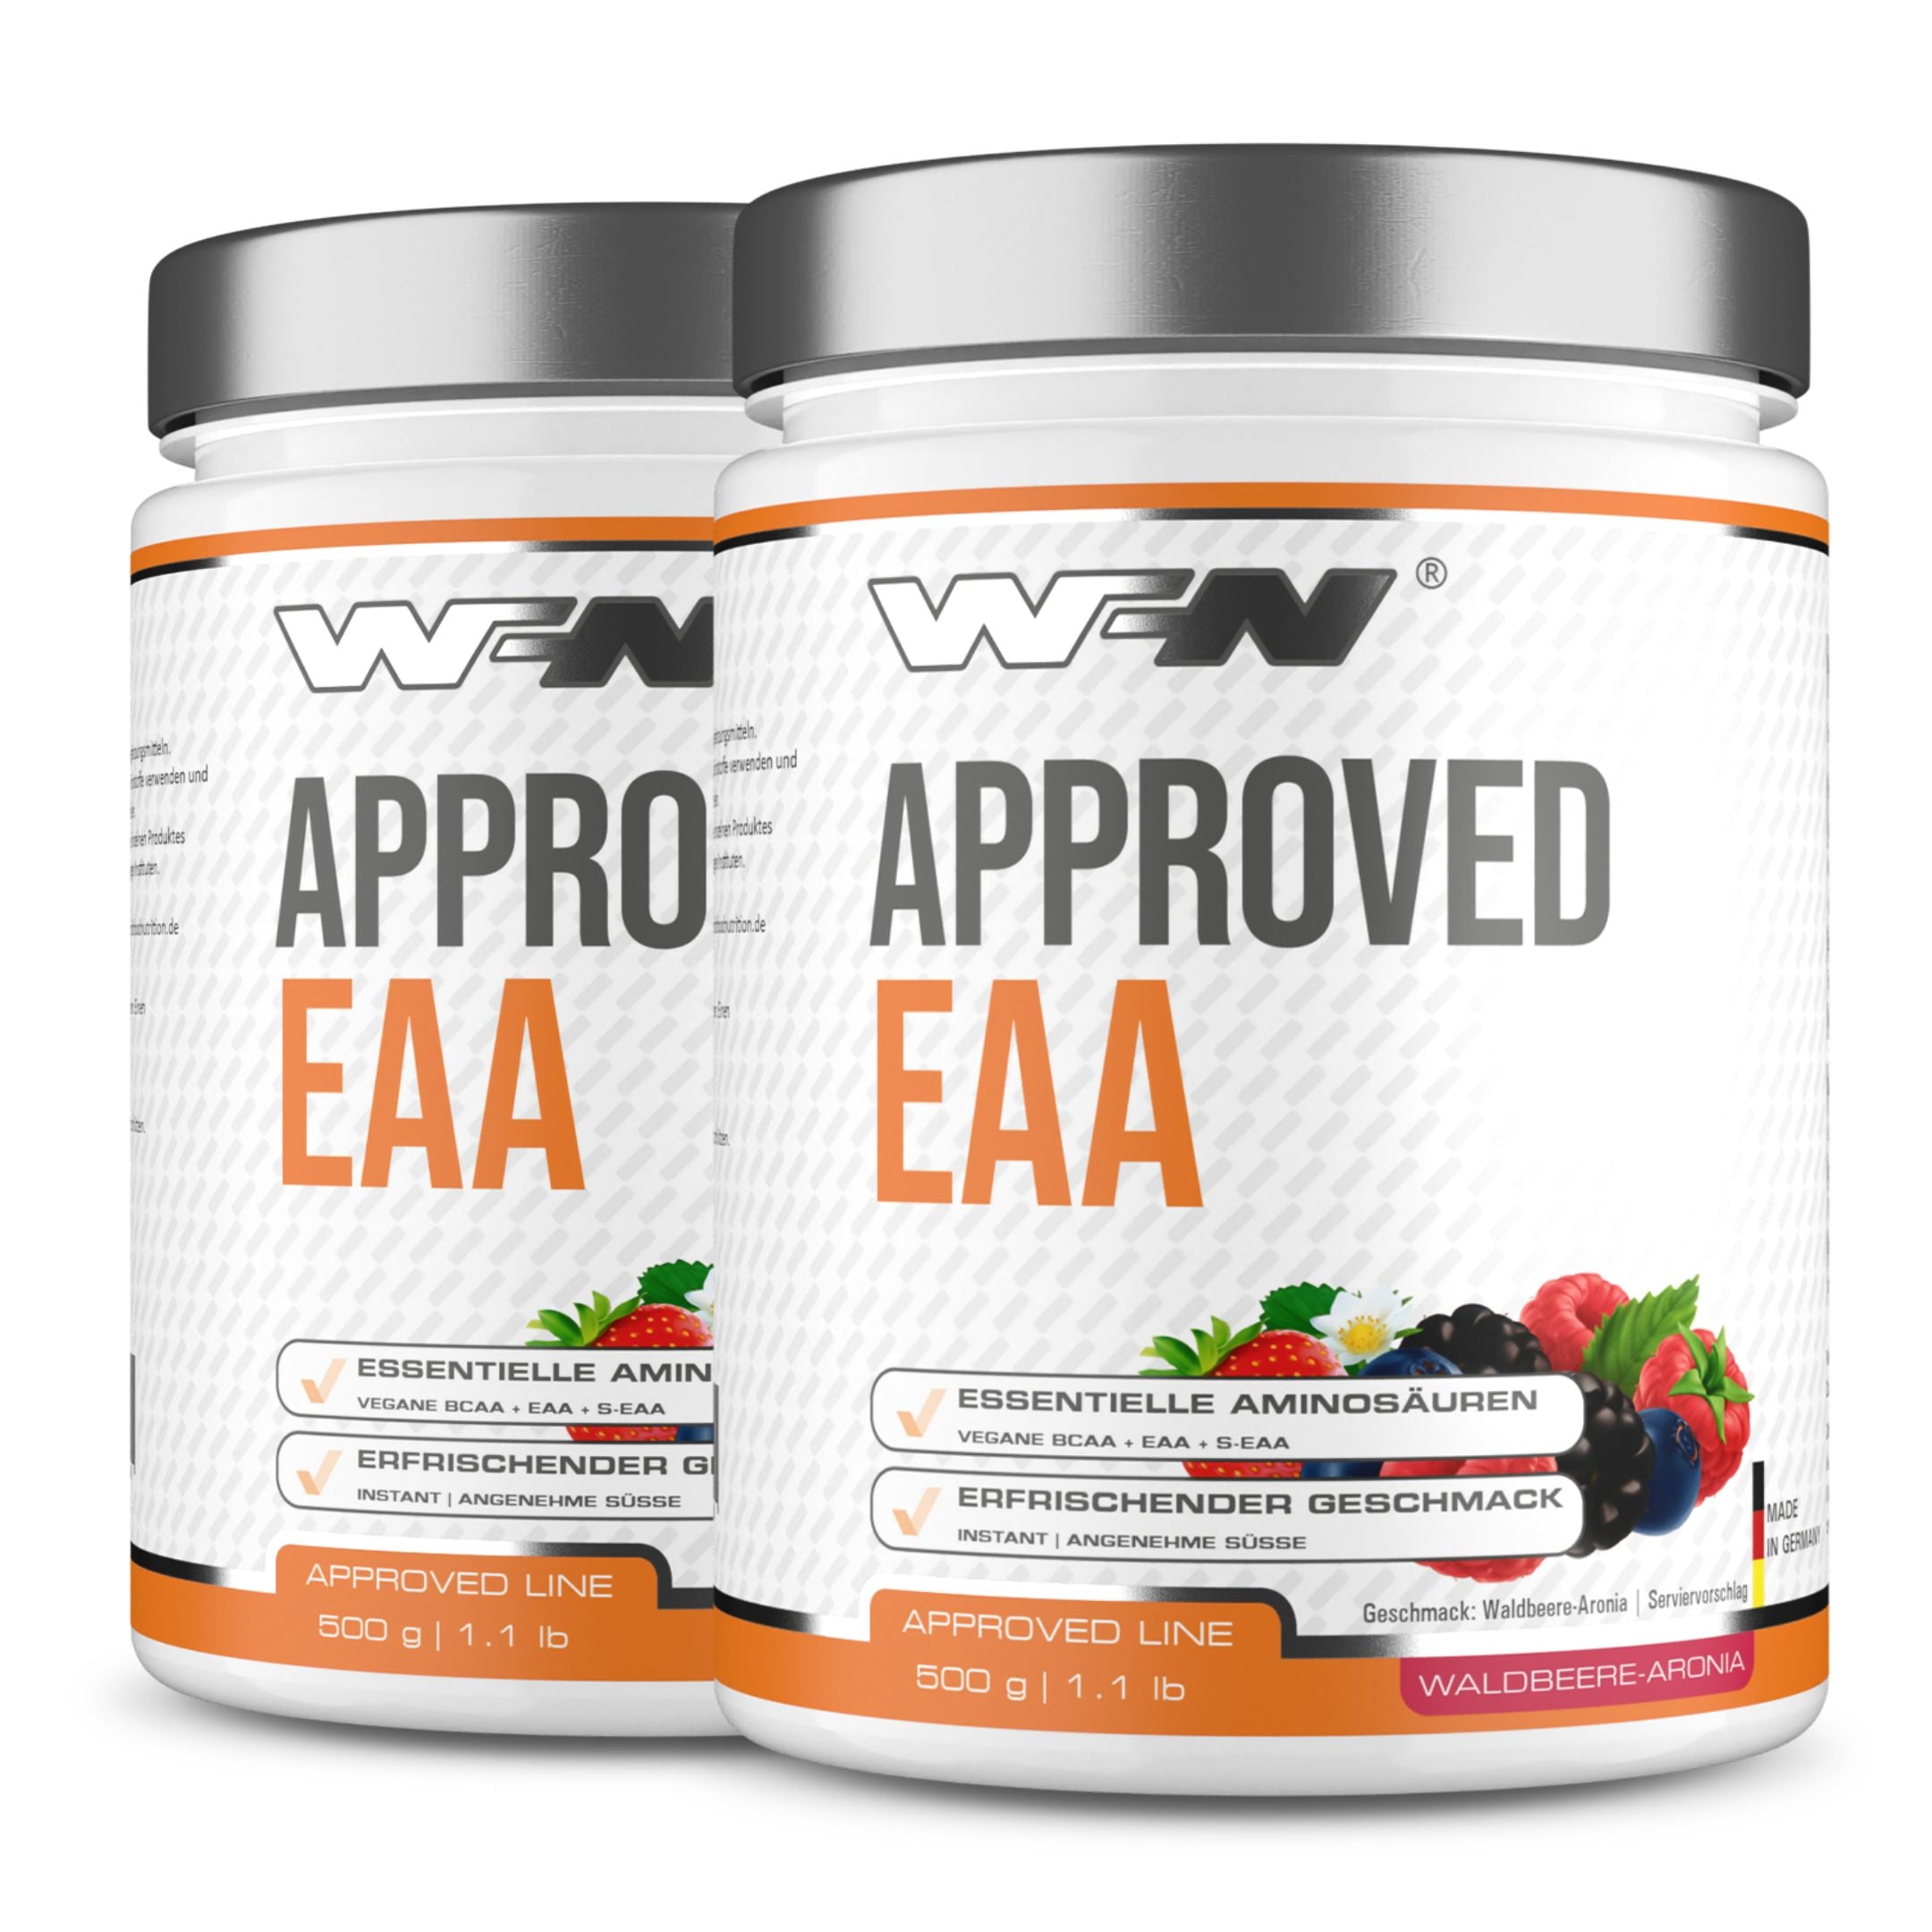 Approved EAA